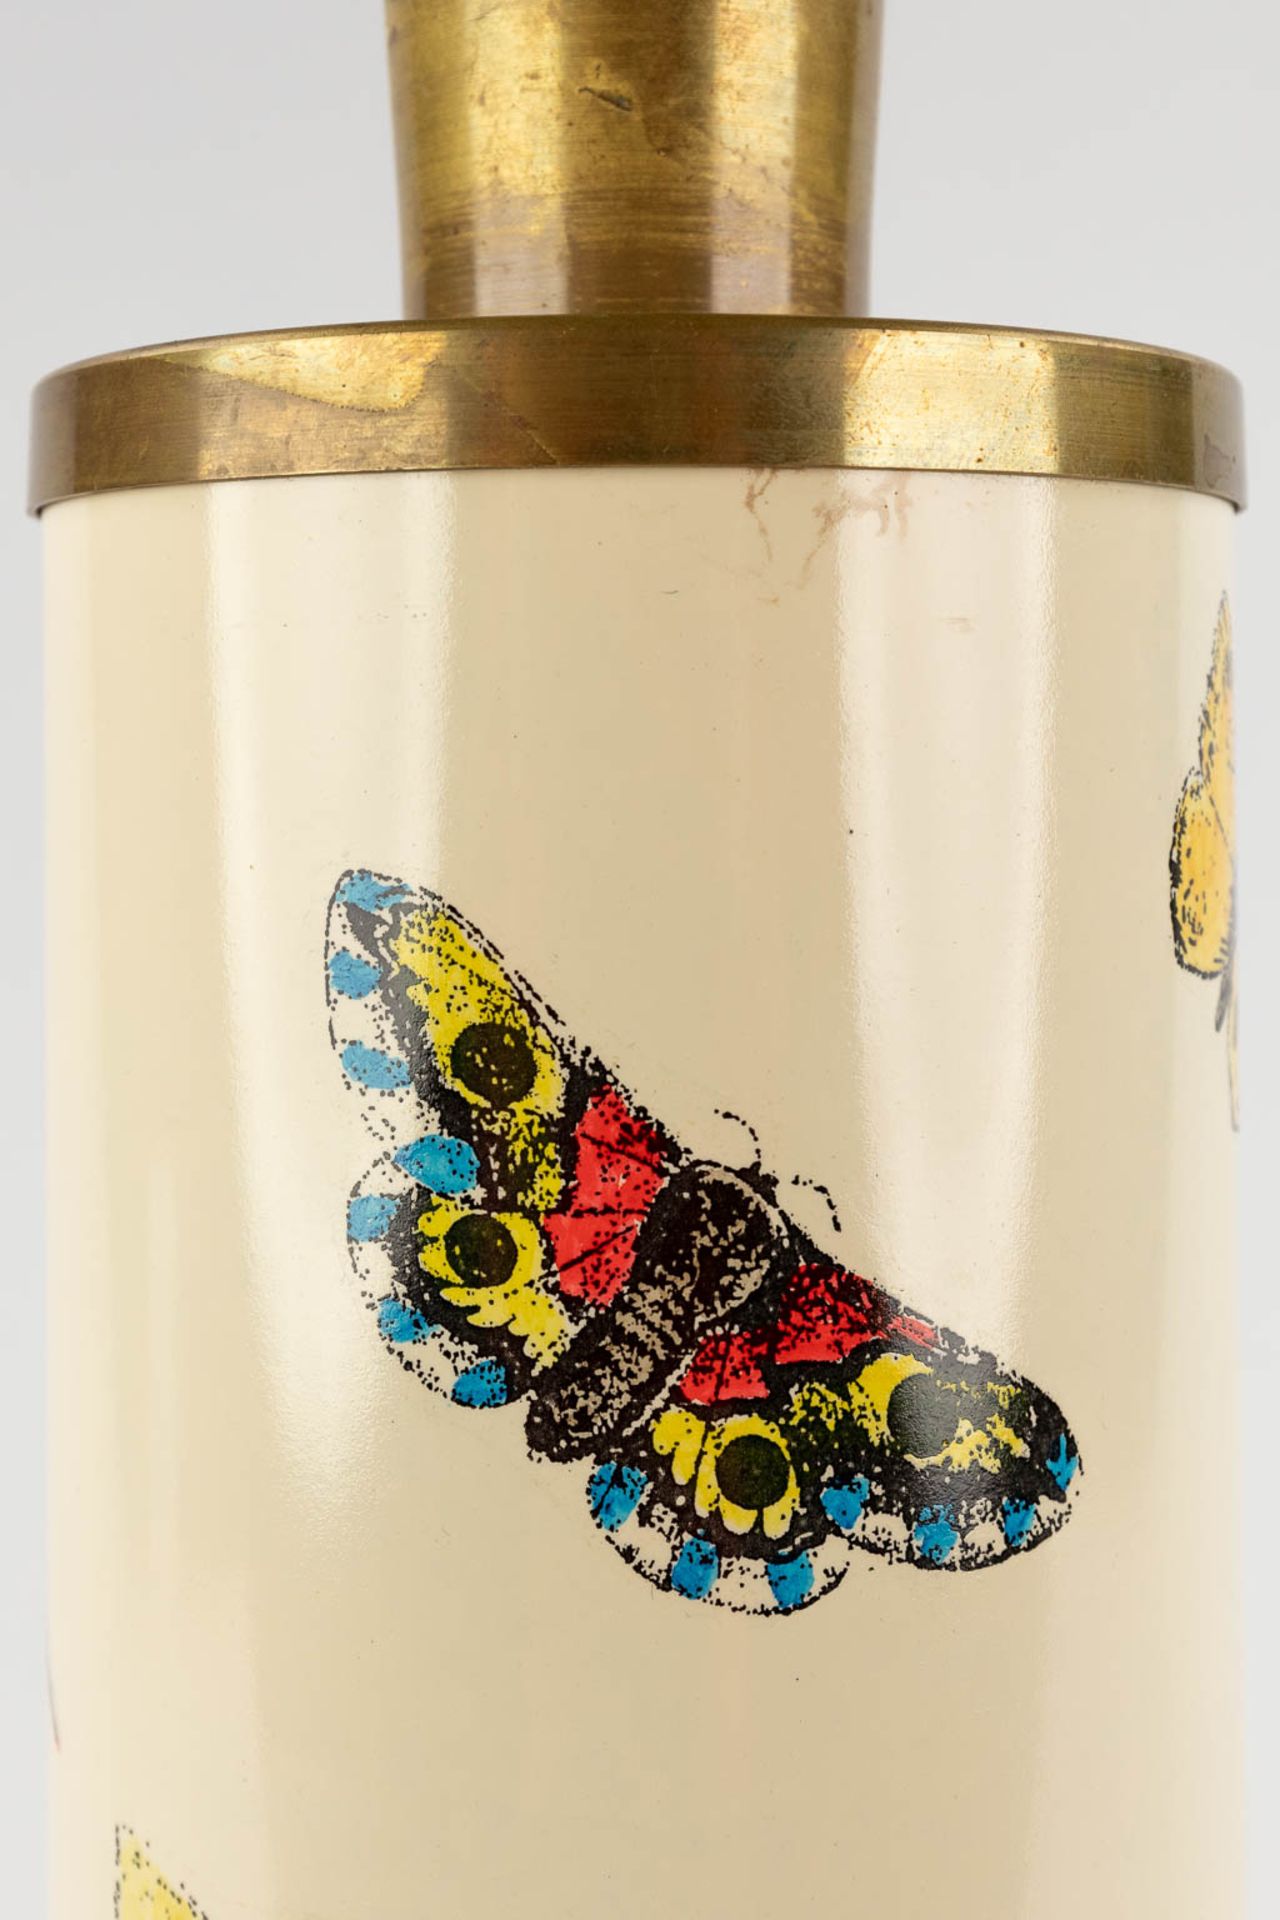 Piero FORNASETTI (1913-1988) 'Farfalla', table lamp with butterfly decor. (H:41 x D:10,5 cm) - Image 10 of 11